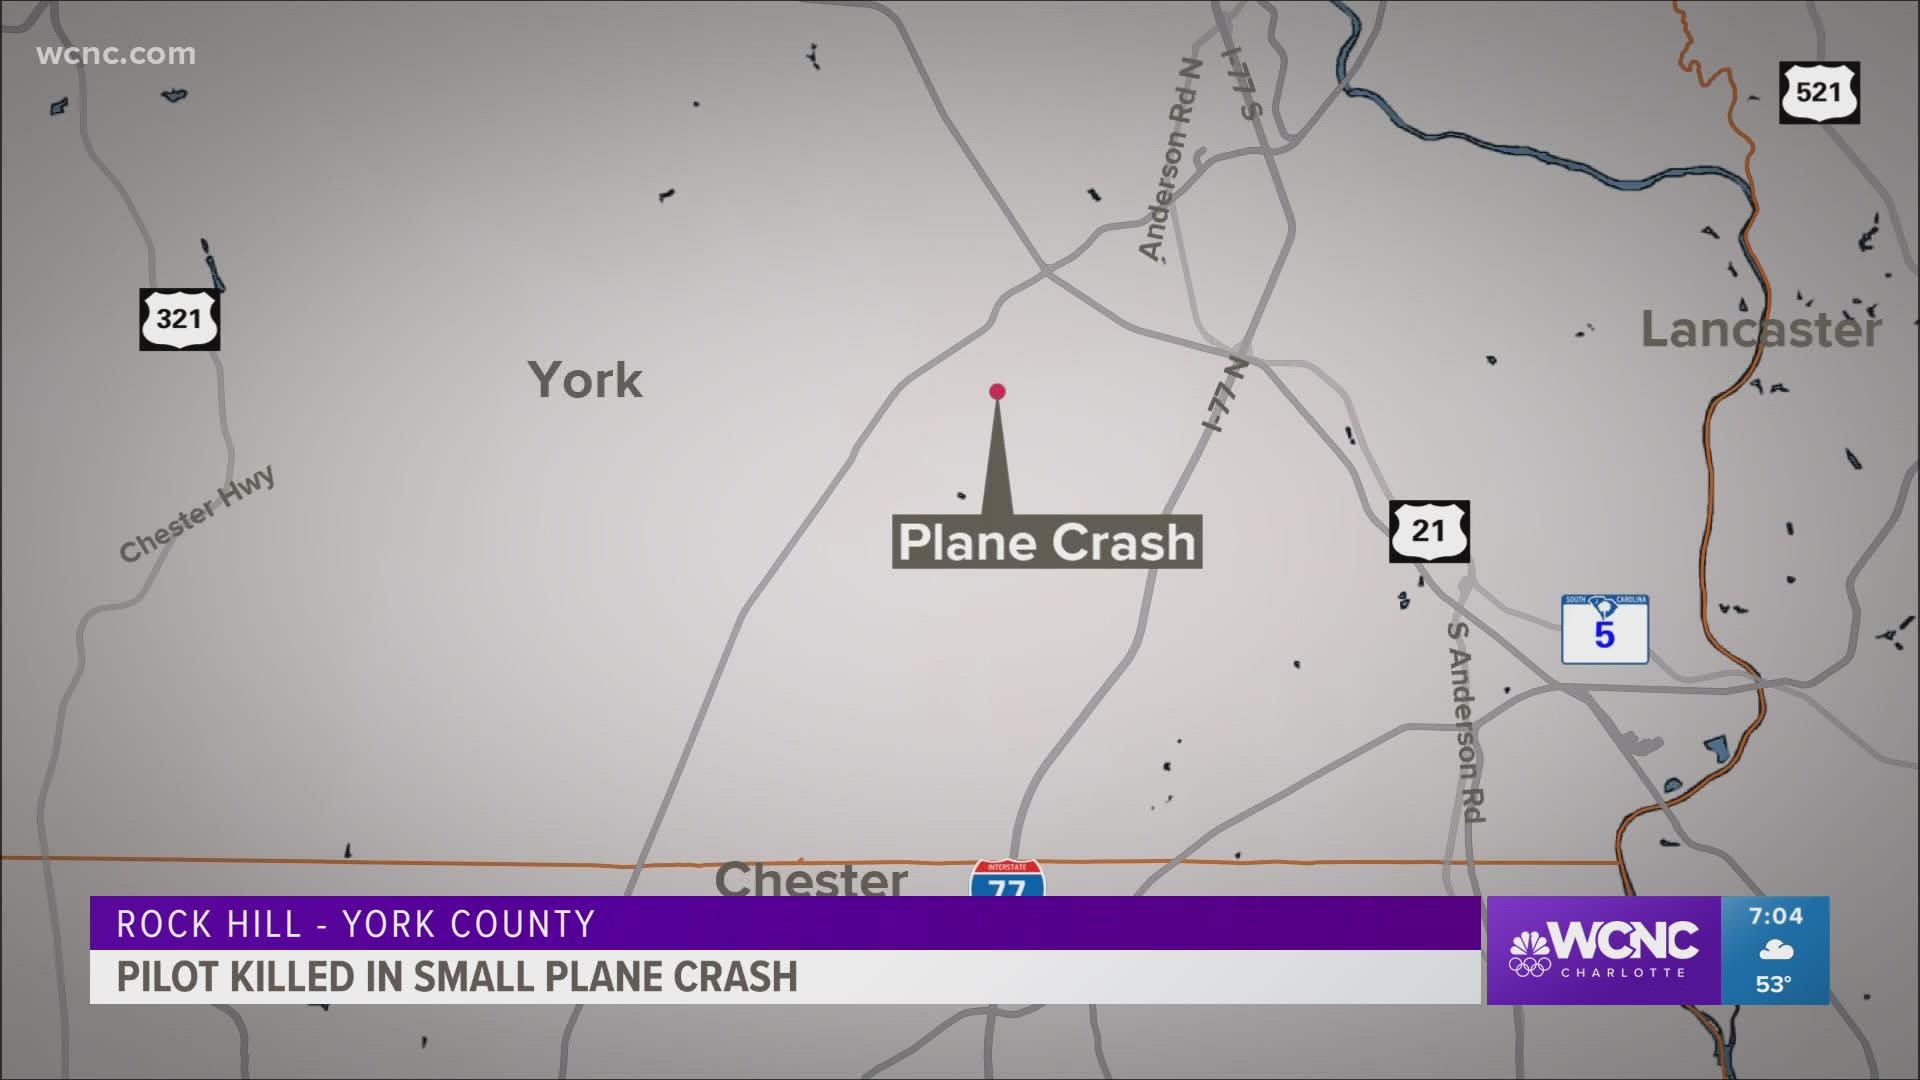 The pilot was flying from Georgia to the Rock Hill airport.